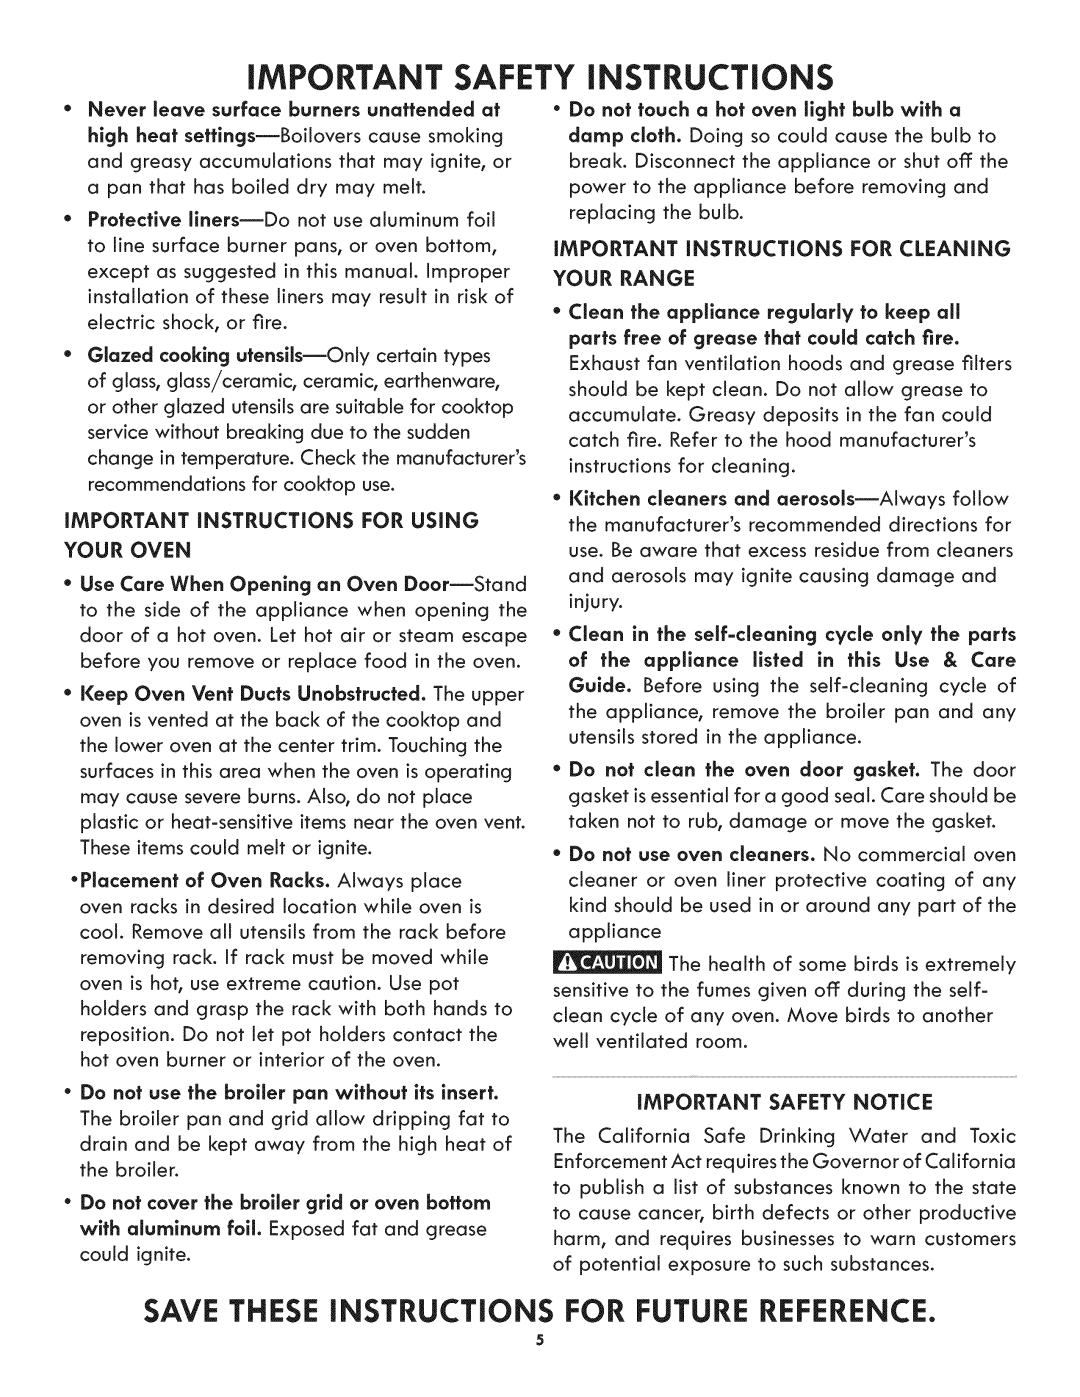 Kenmore 790.7890 manual iMPORTANT SAFETY iNSTRUCTiONS, Save These Instructions For Future Reference, Your Oven, Your Range 